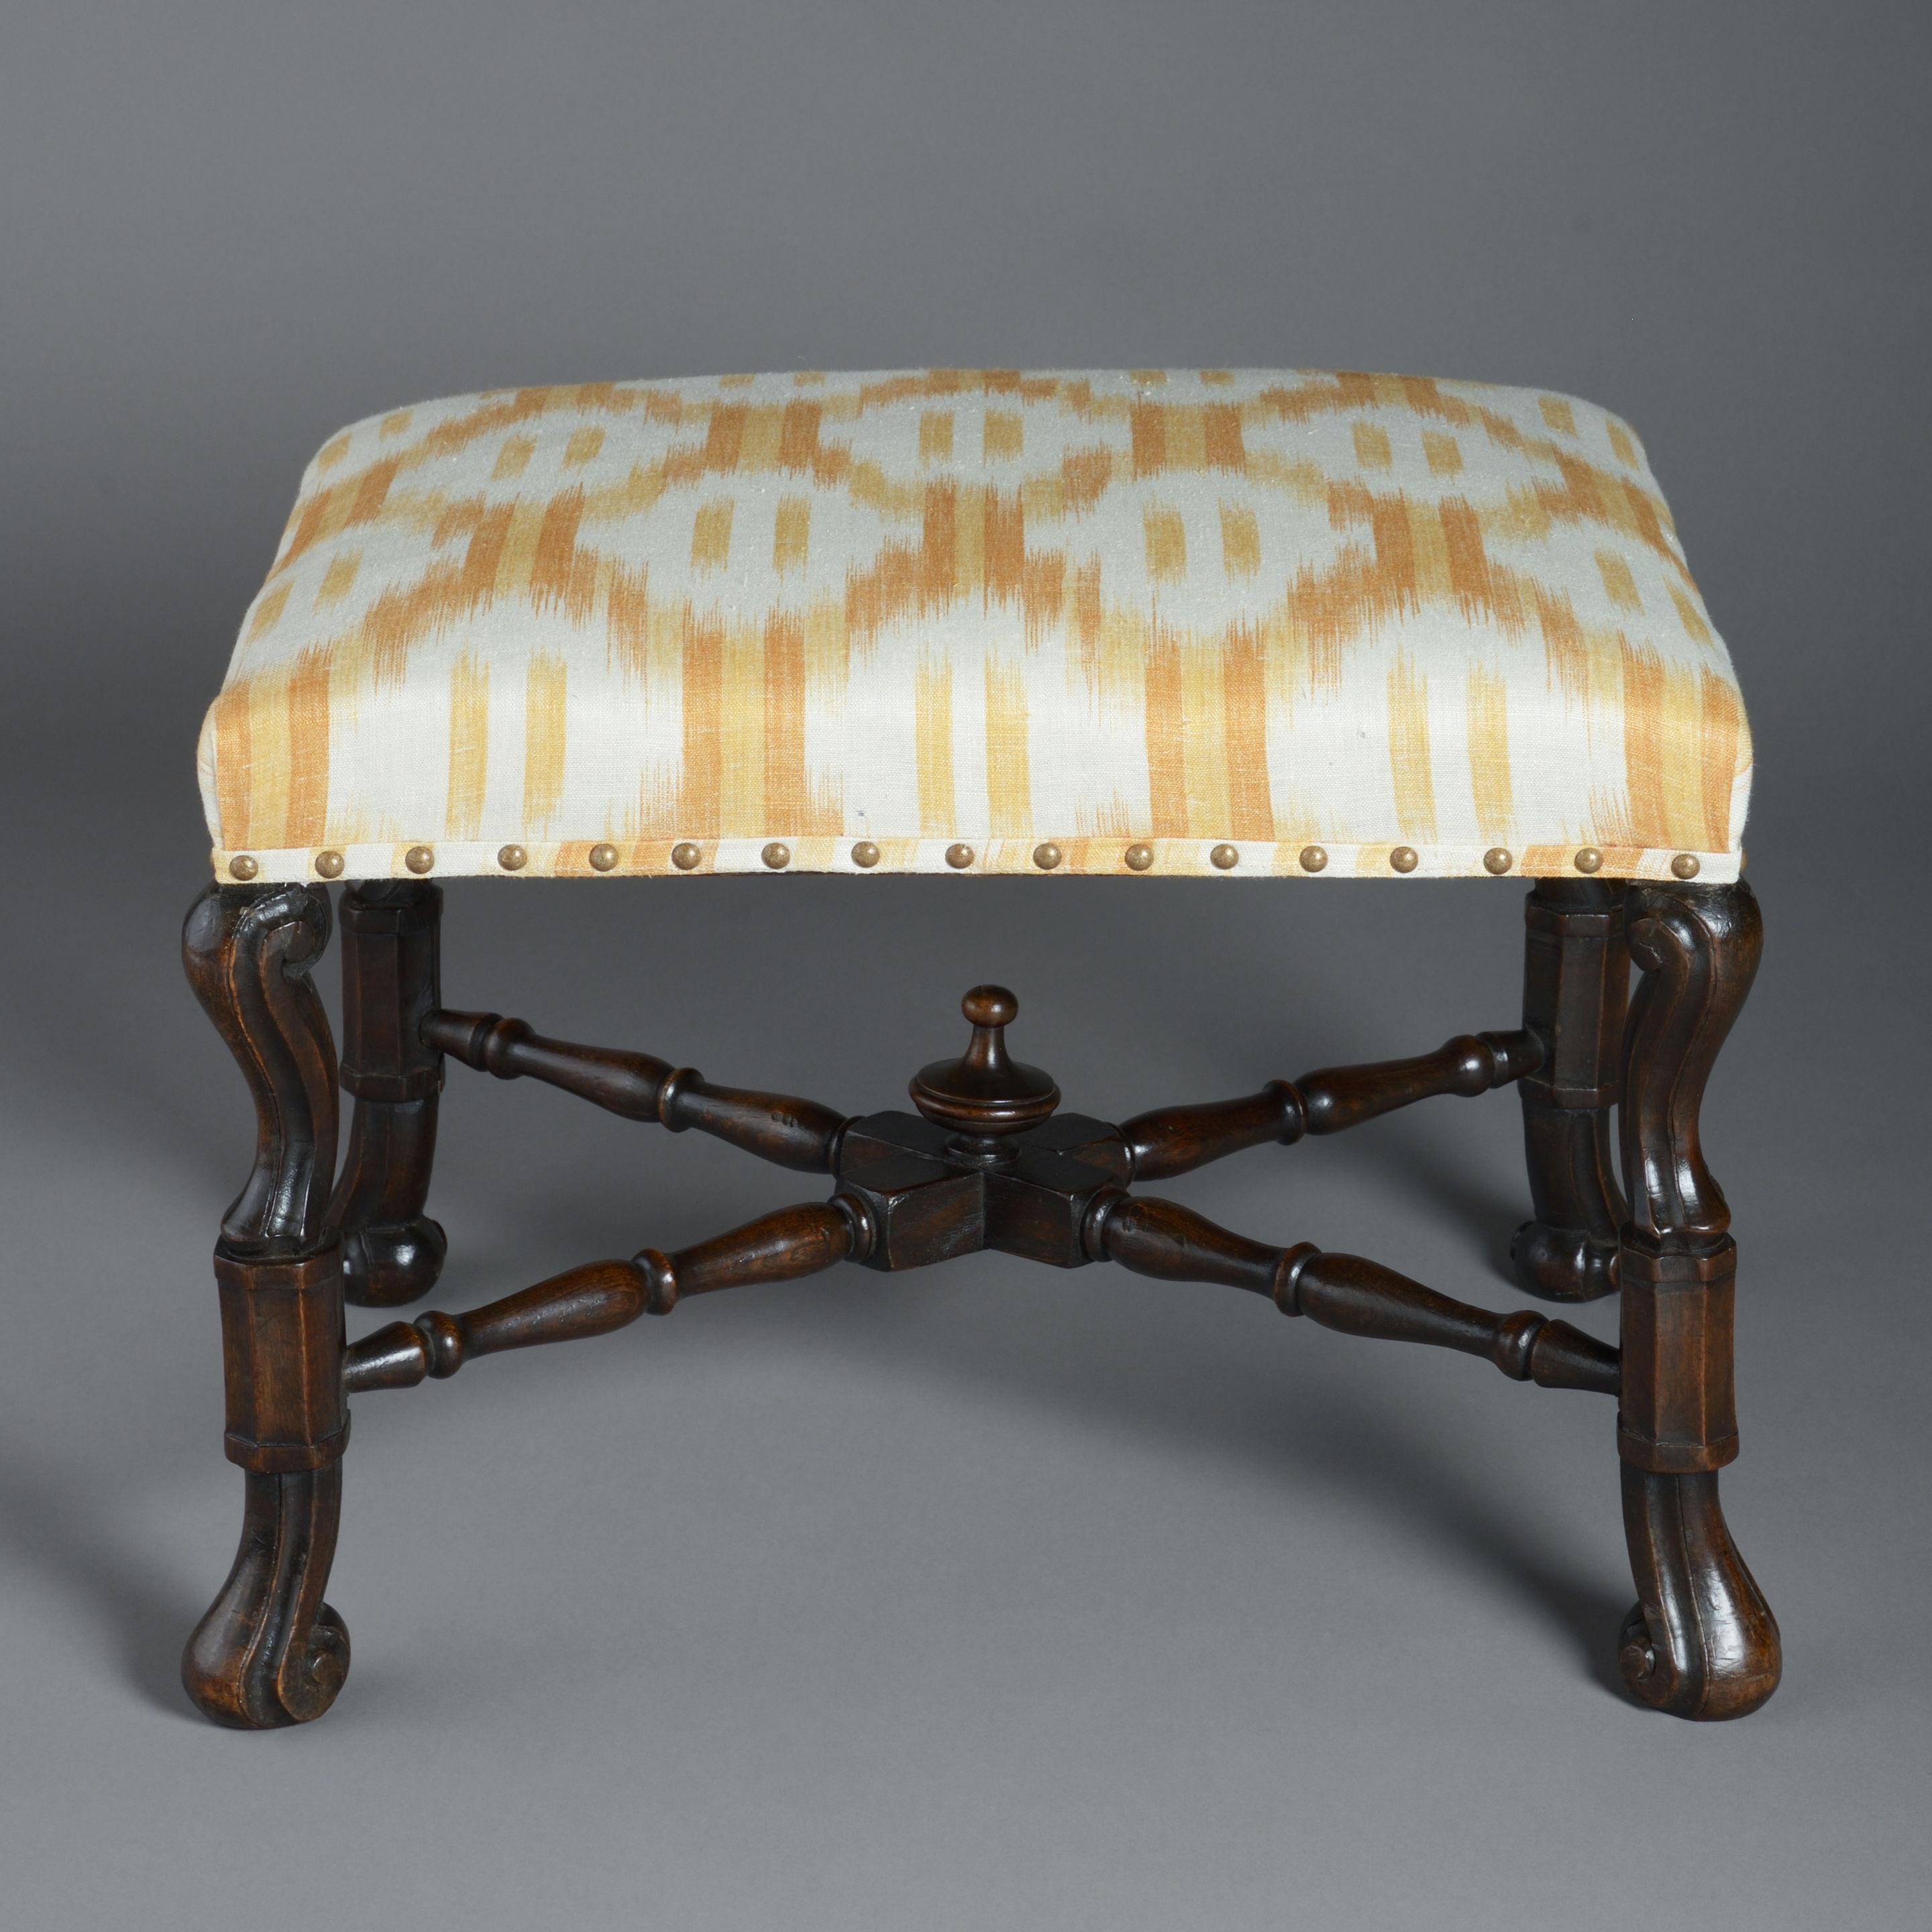 A late 19th century walnut stool in the Charles II manner, the upholstered seat upon carved braganza legs with a conjoining X-form stretcher, surmounted with a turned finial.